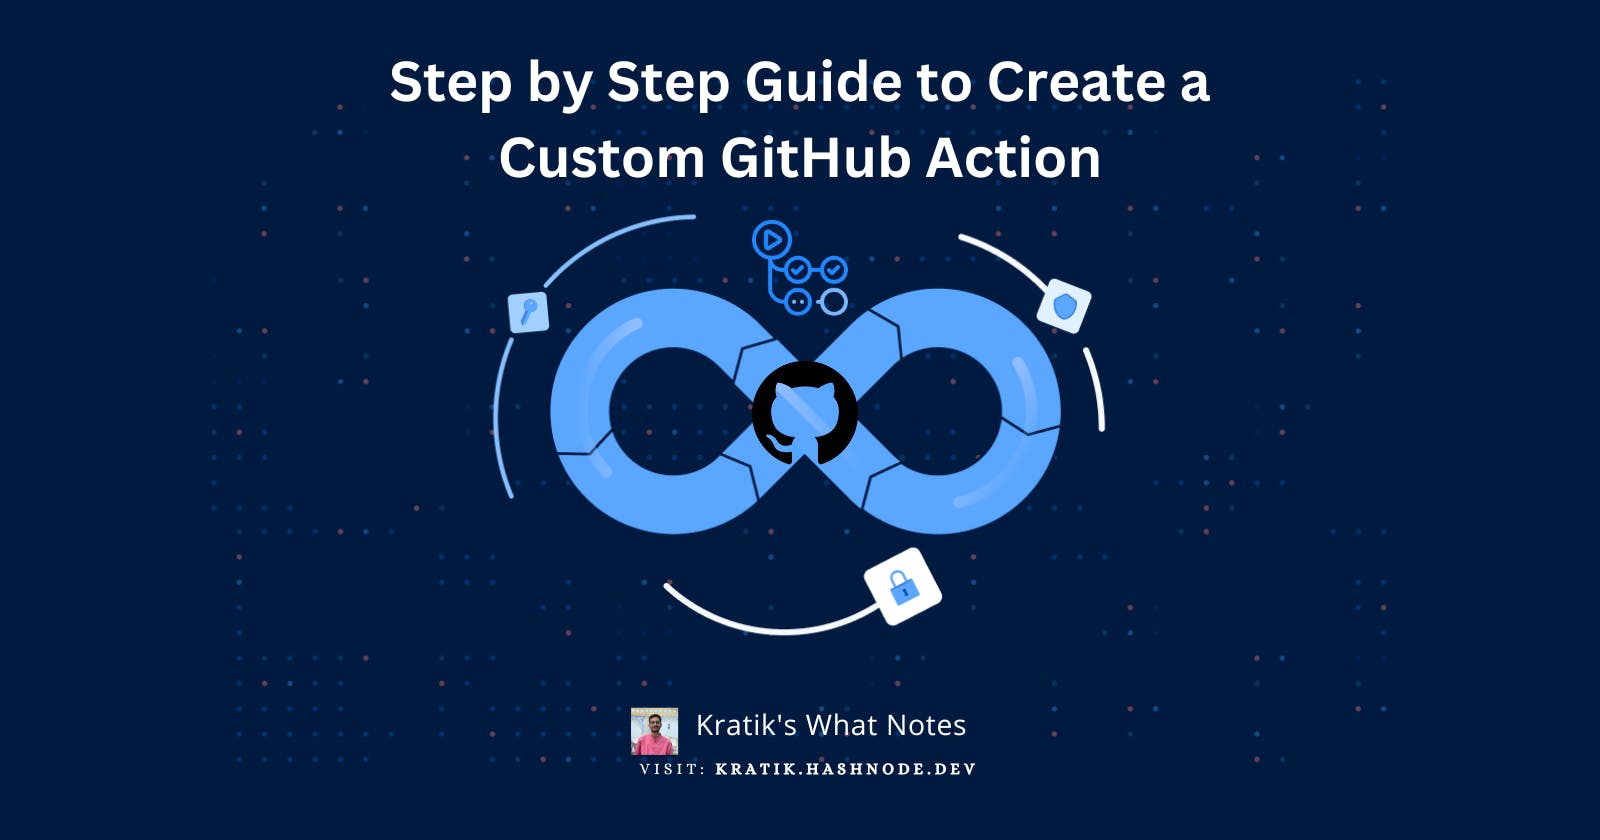 Step by Step Guide to Create a Custom GitHub Action and Publish it to the GitHub Marketplace